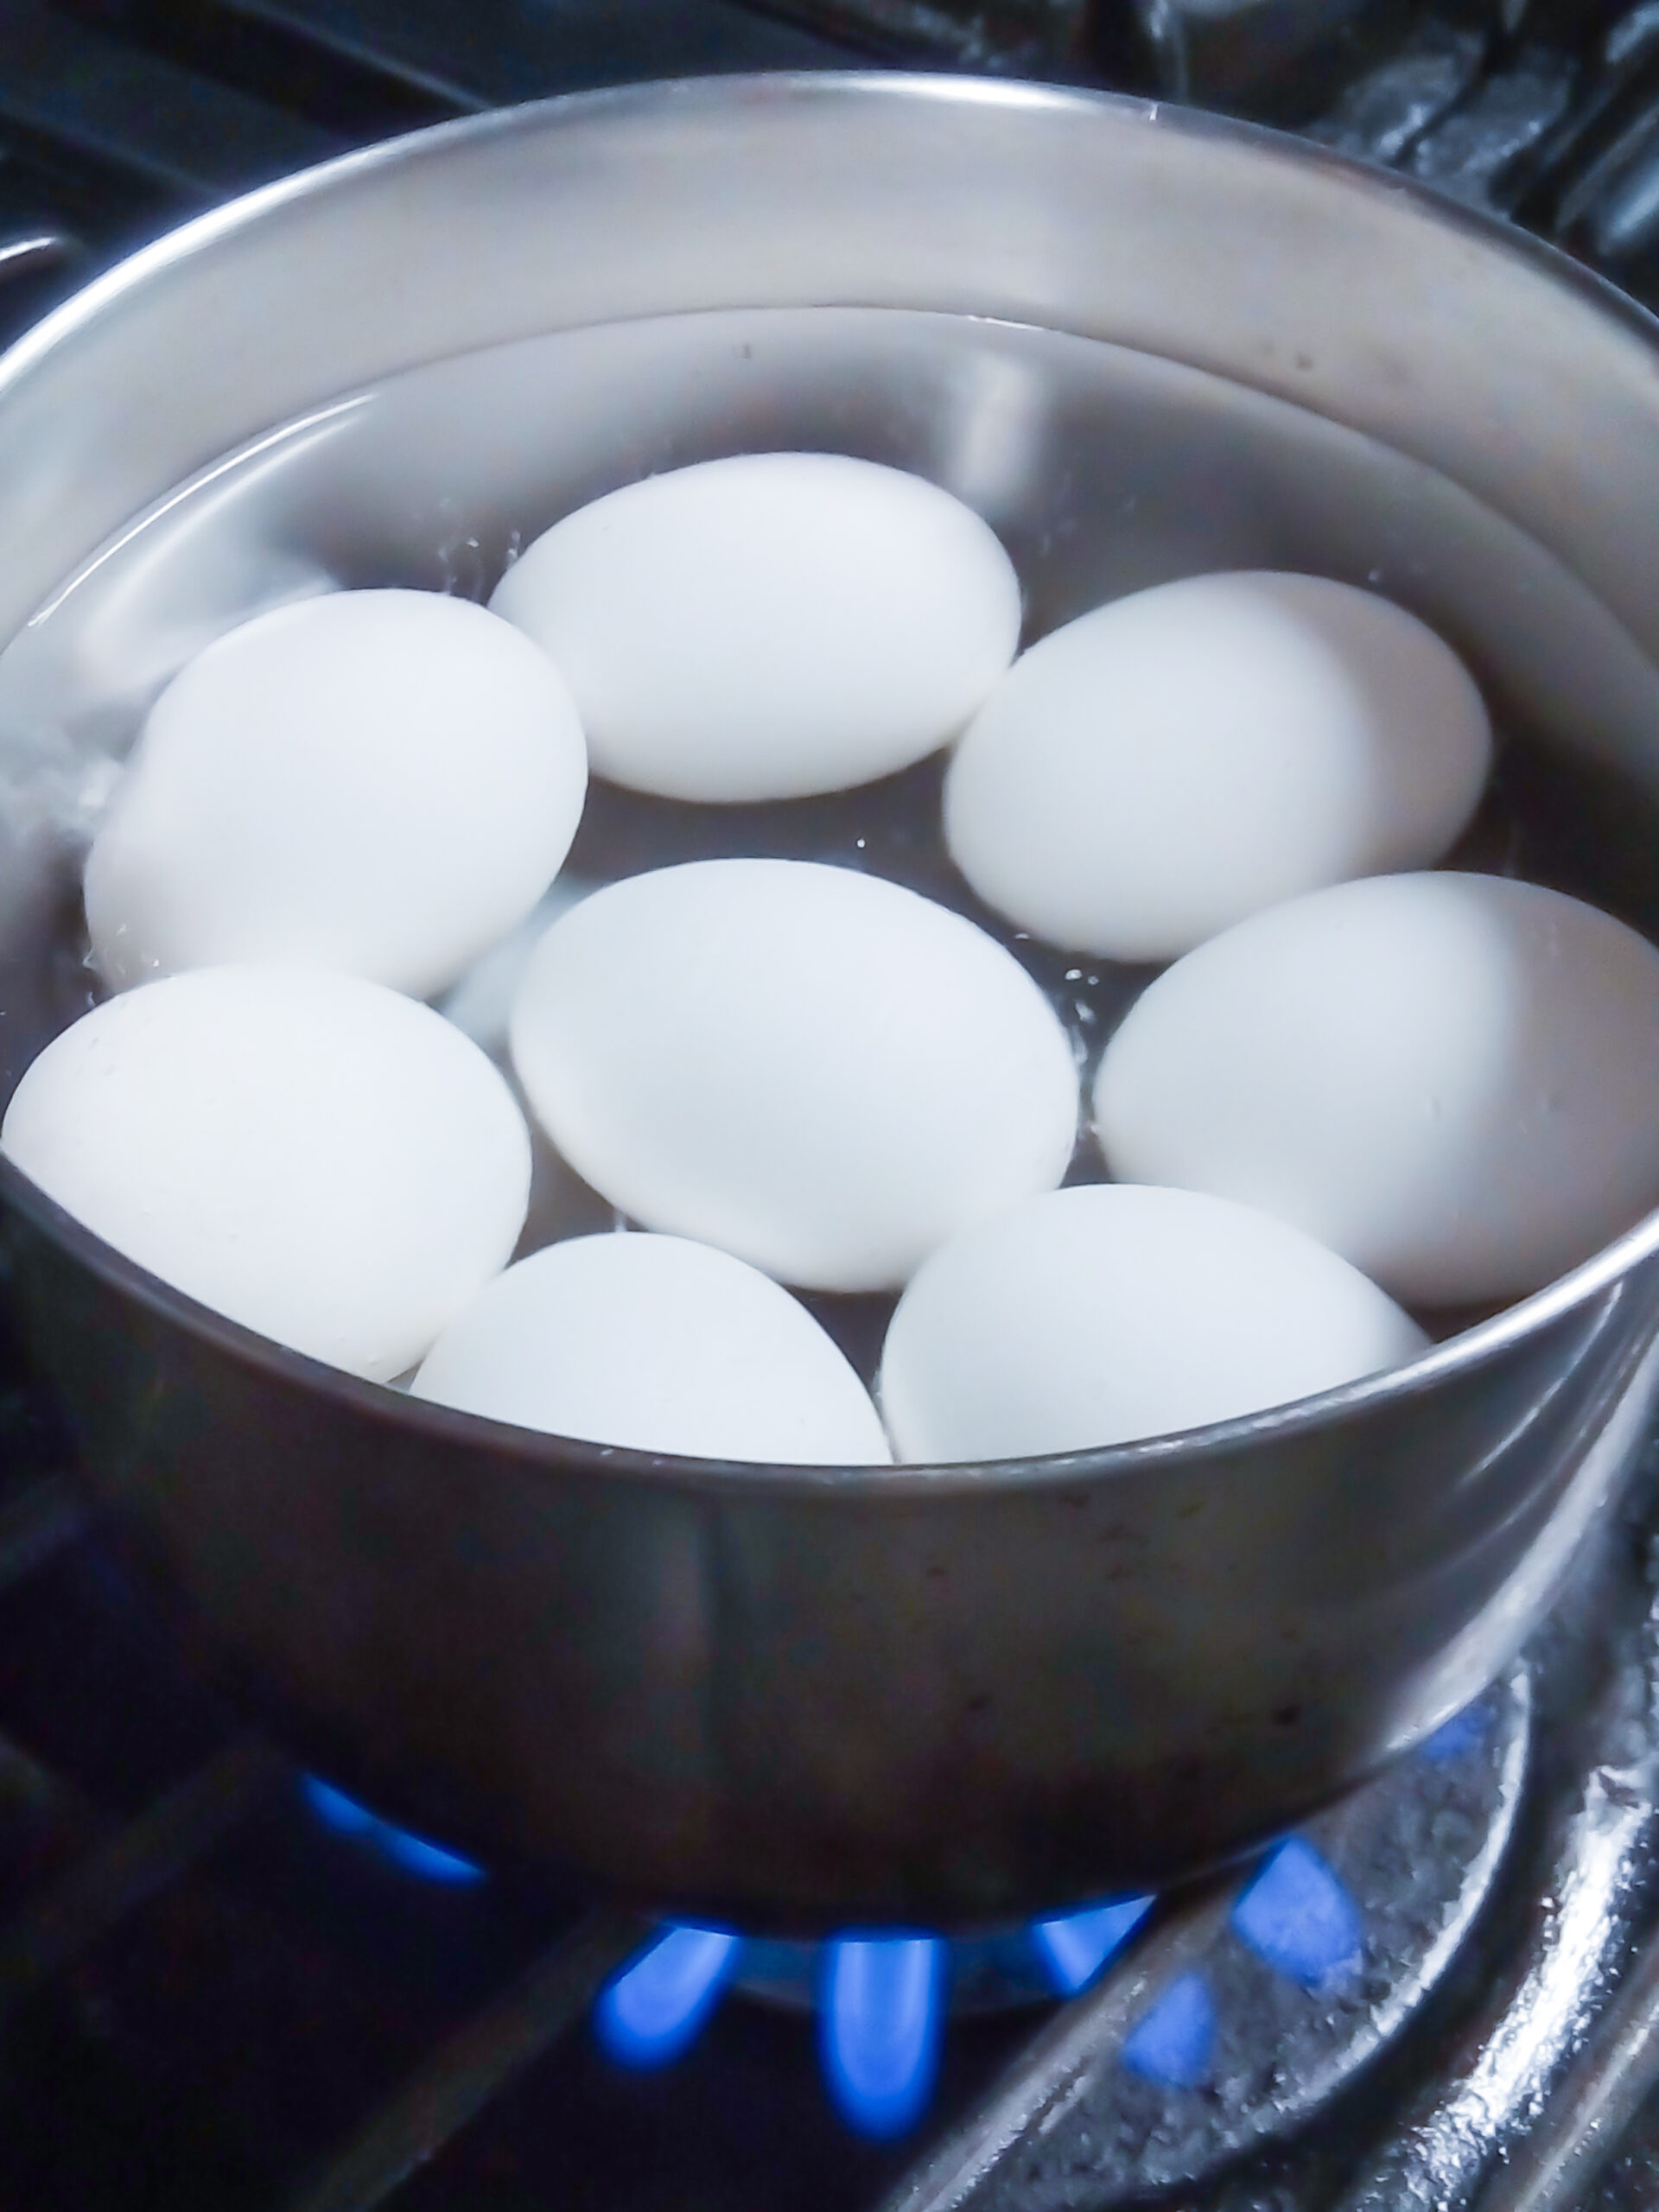 Closeup of eight hard-boiled chicken eggs cooking in pot of hot water on hot stove